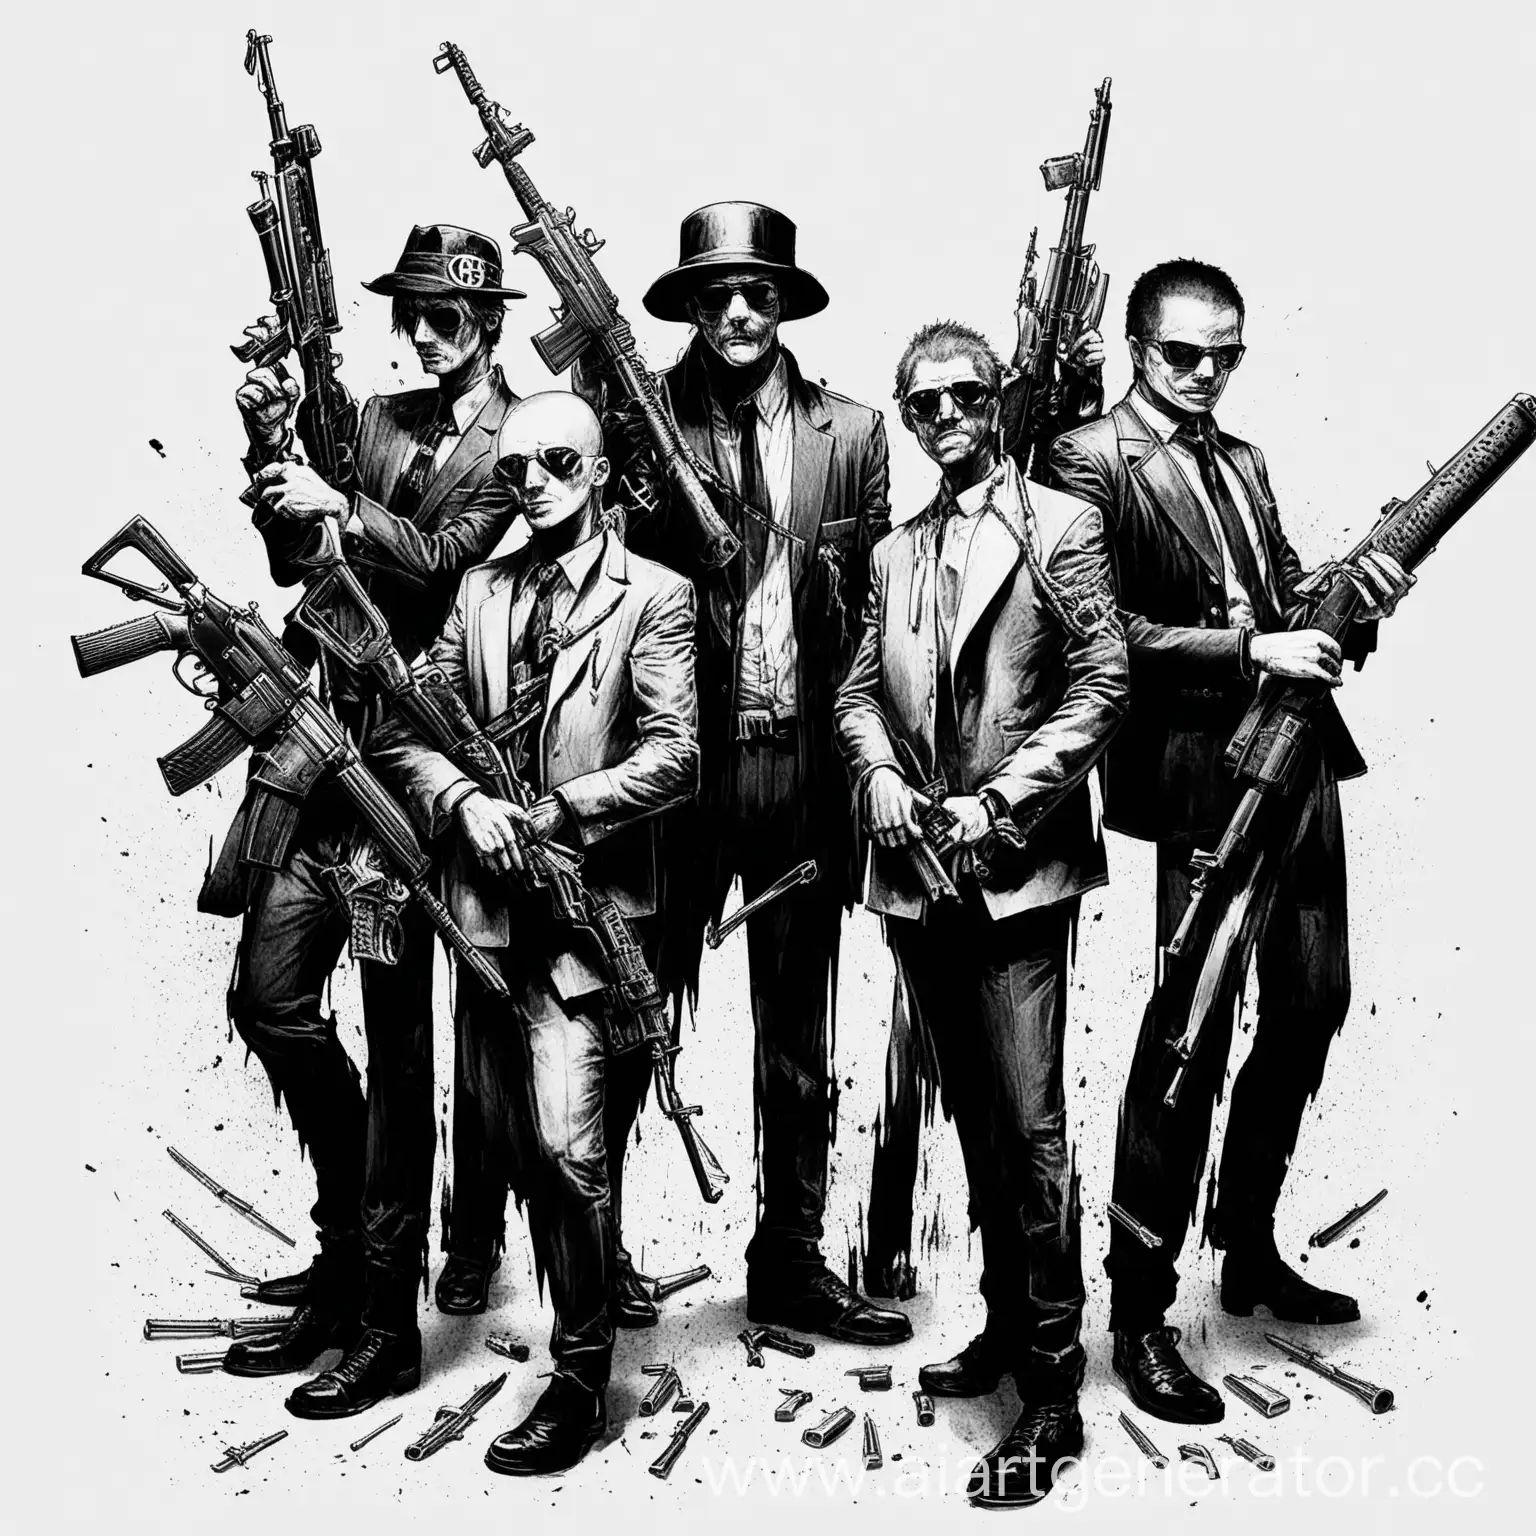 Criminal-Band-with-Weapons-on-BlackandWhite-Background